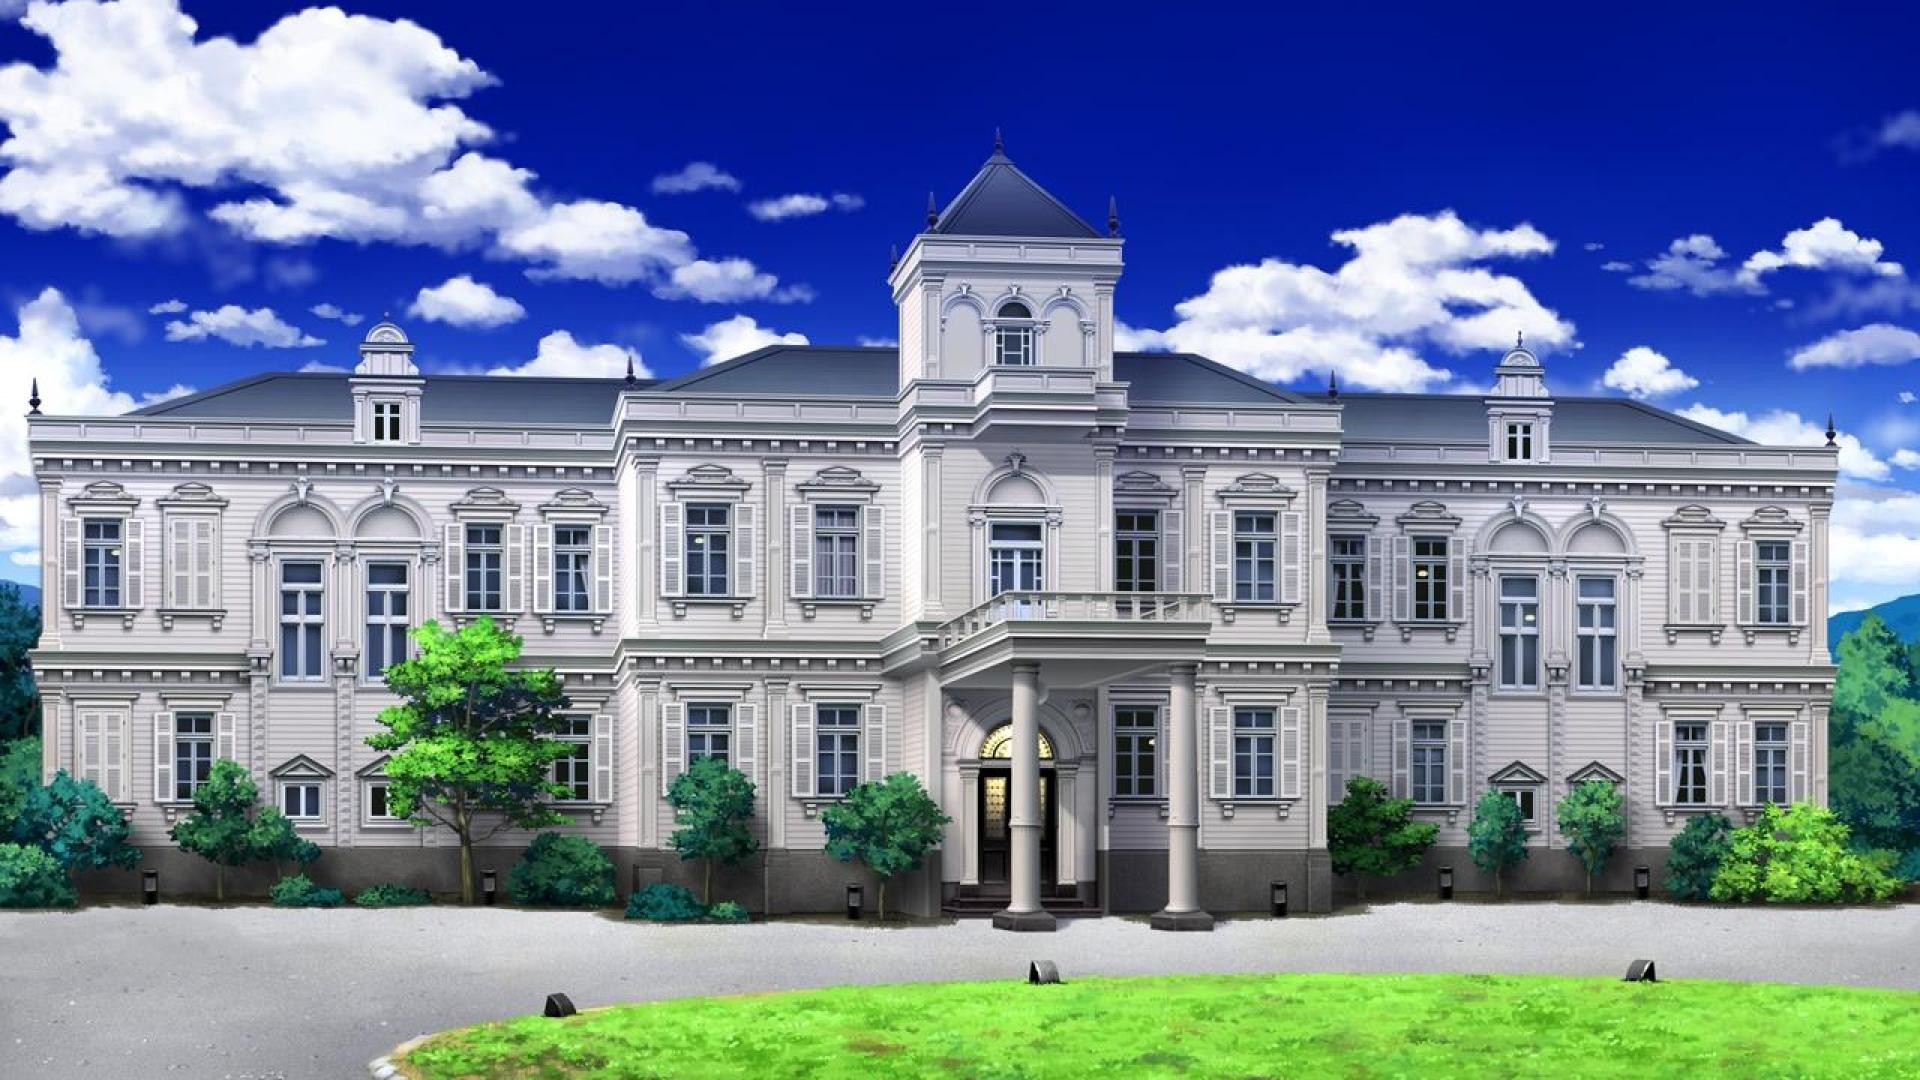 Mansion - Other & Anime Background Wallpapers on Desktop Nexus (Image  1475983)